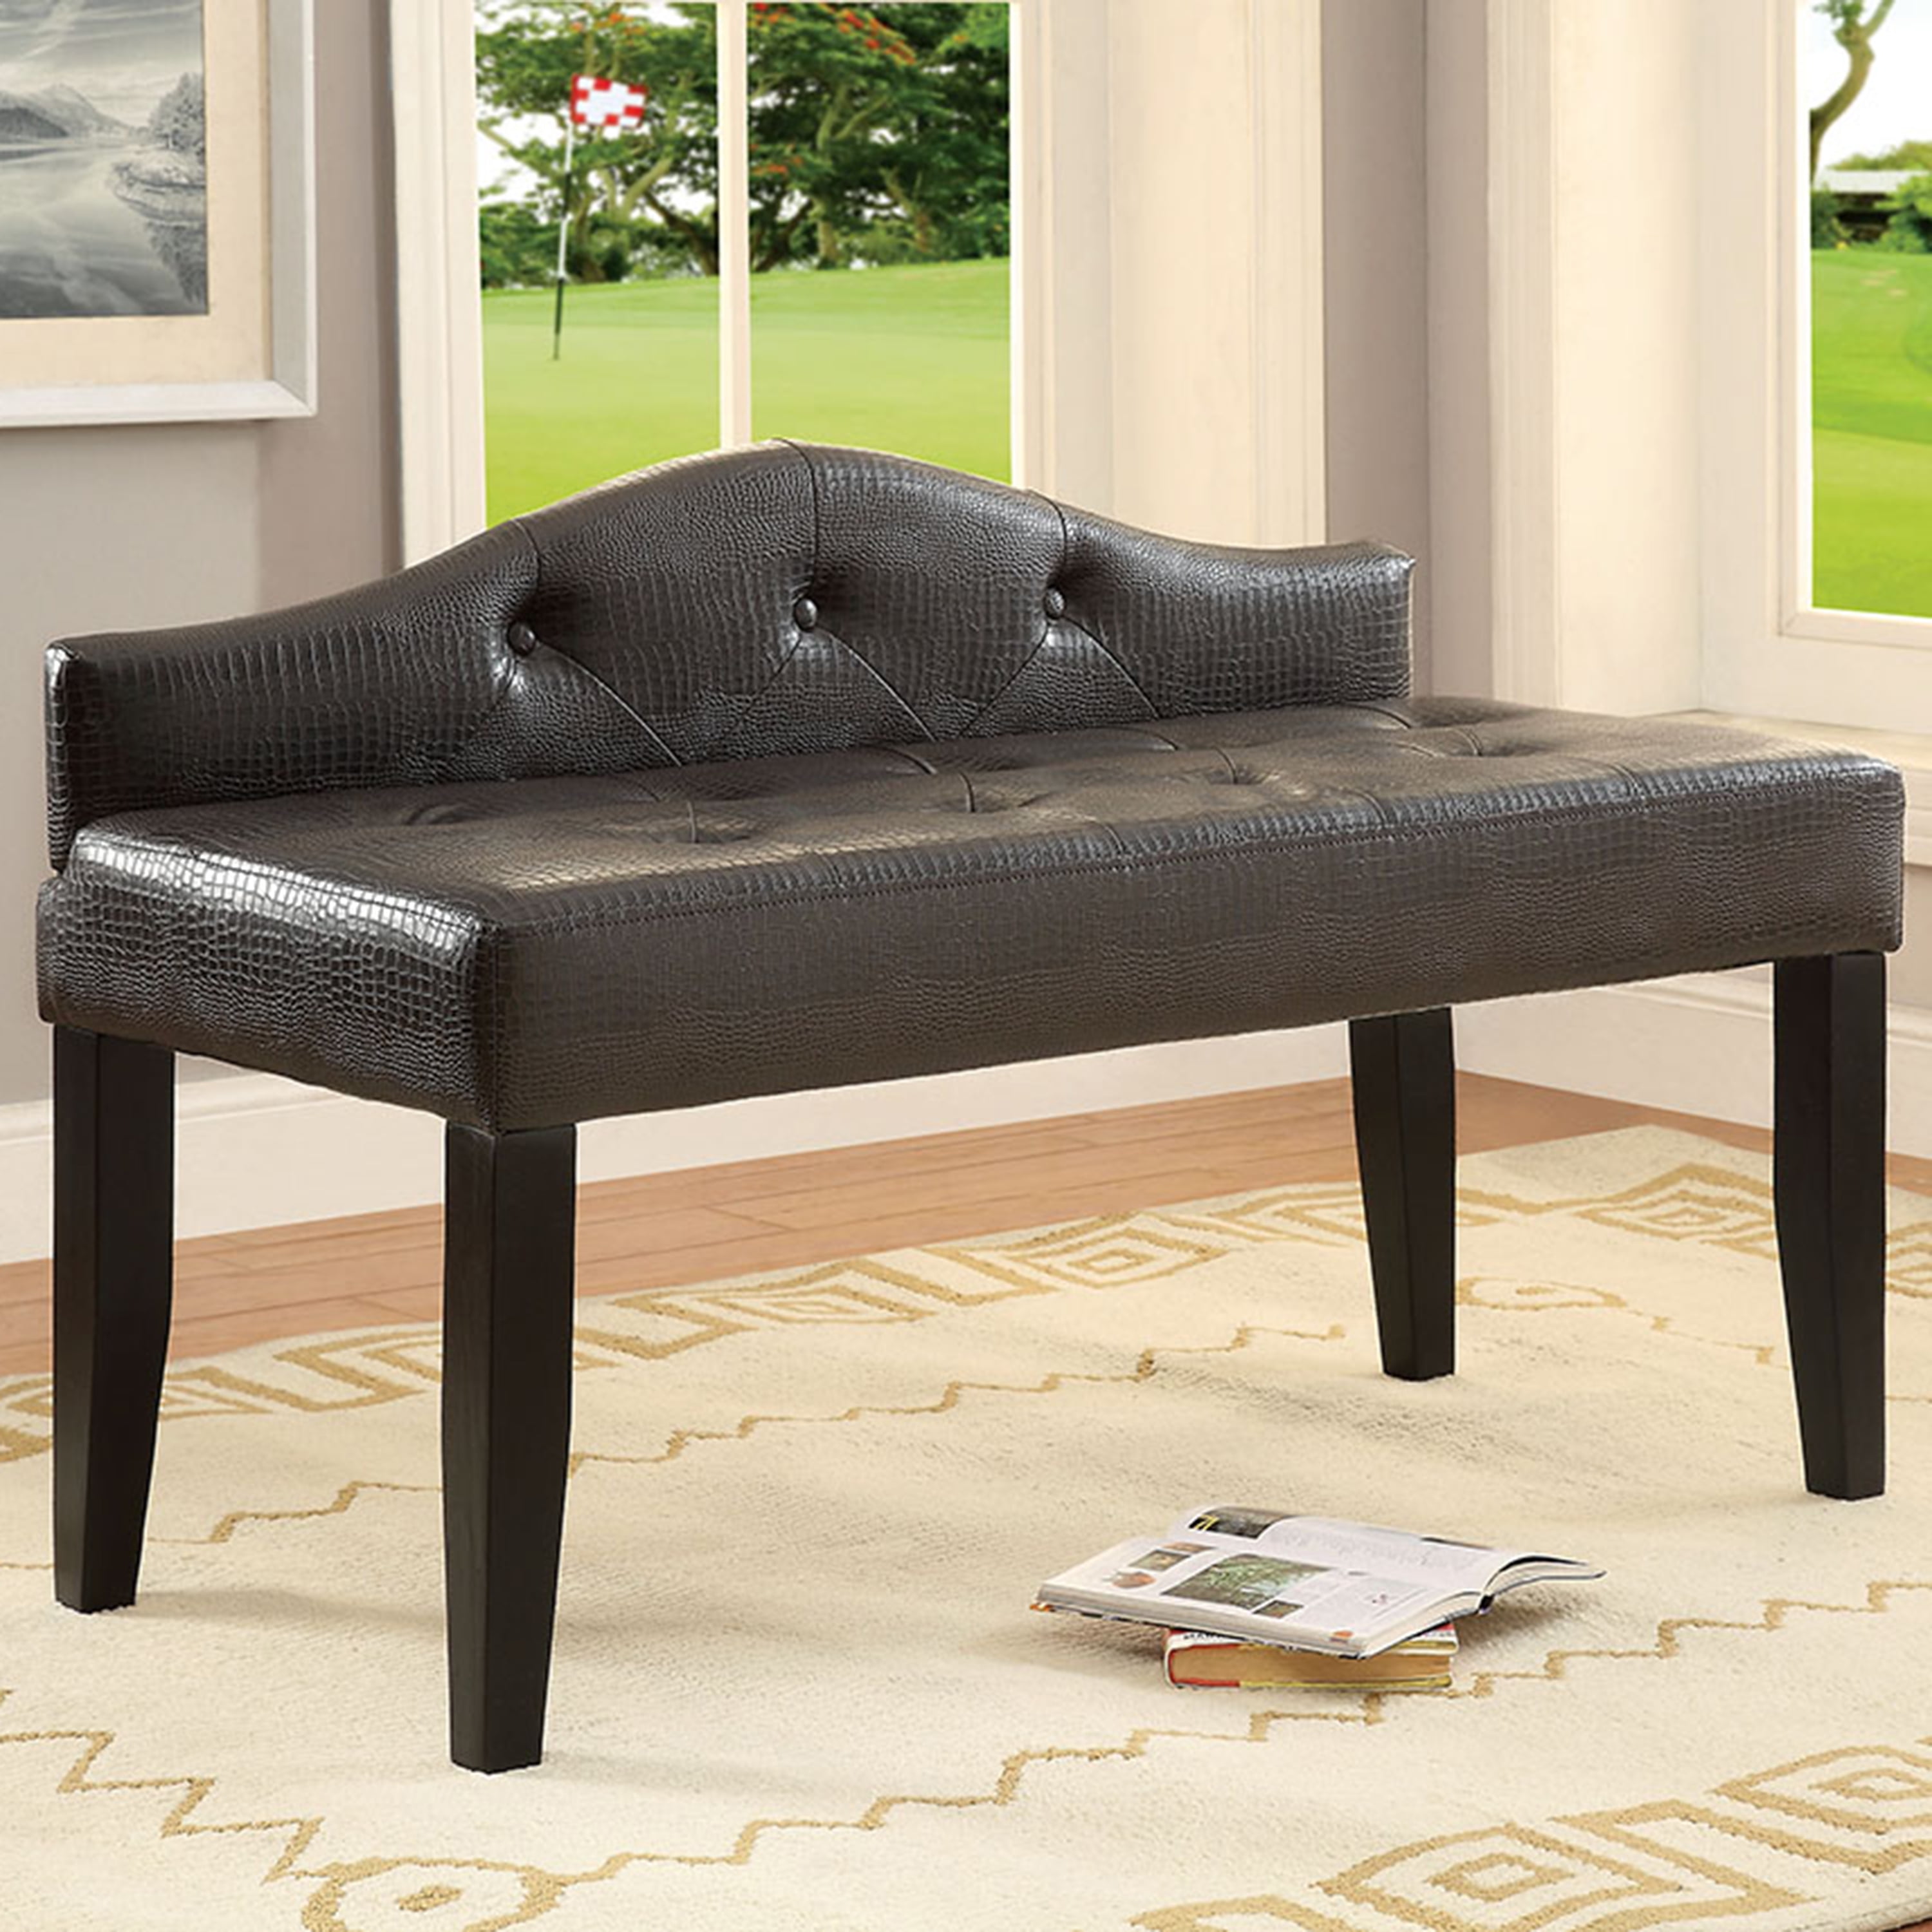 Top 10 Stylish Bedroom Upholstered Benches On The Market